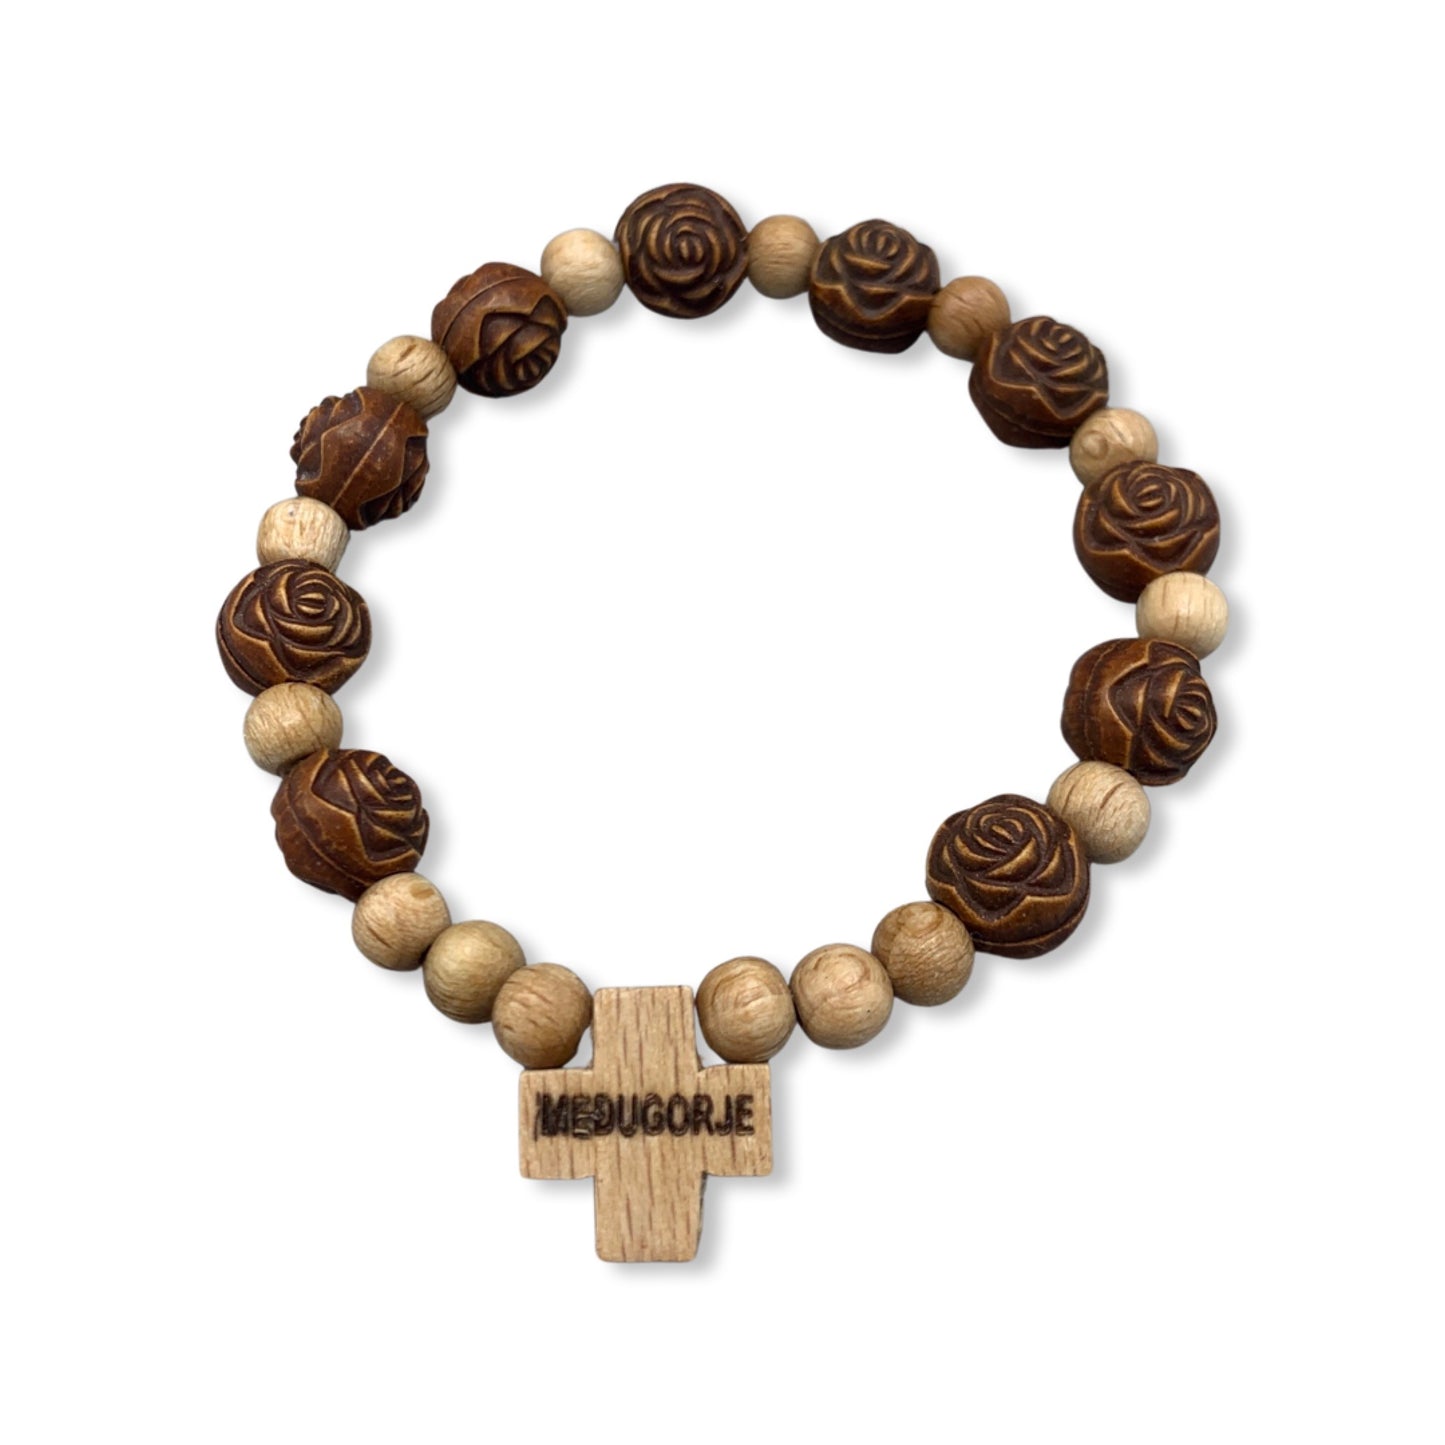 Wooden Flower Decade Rosary Bracelet of Assorted Colors